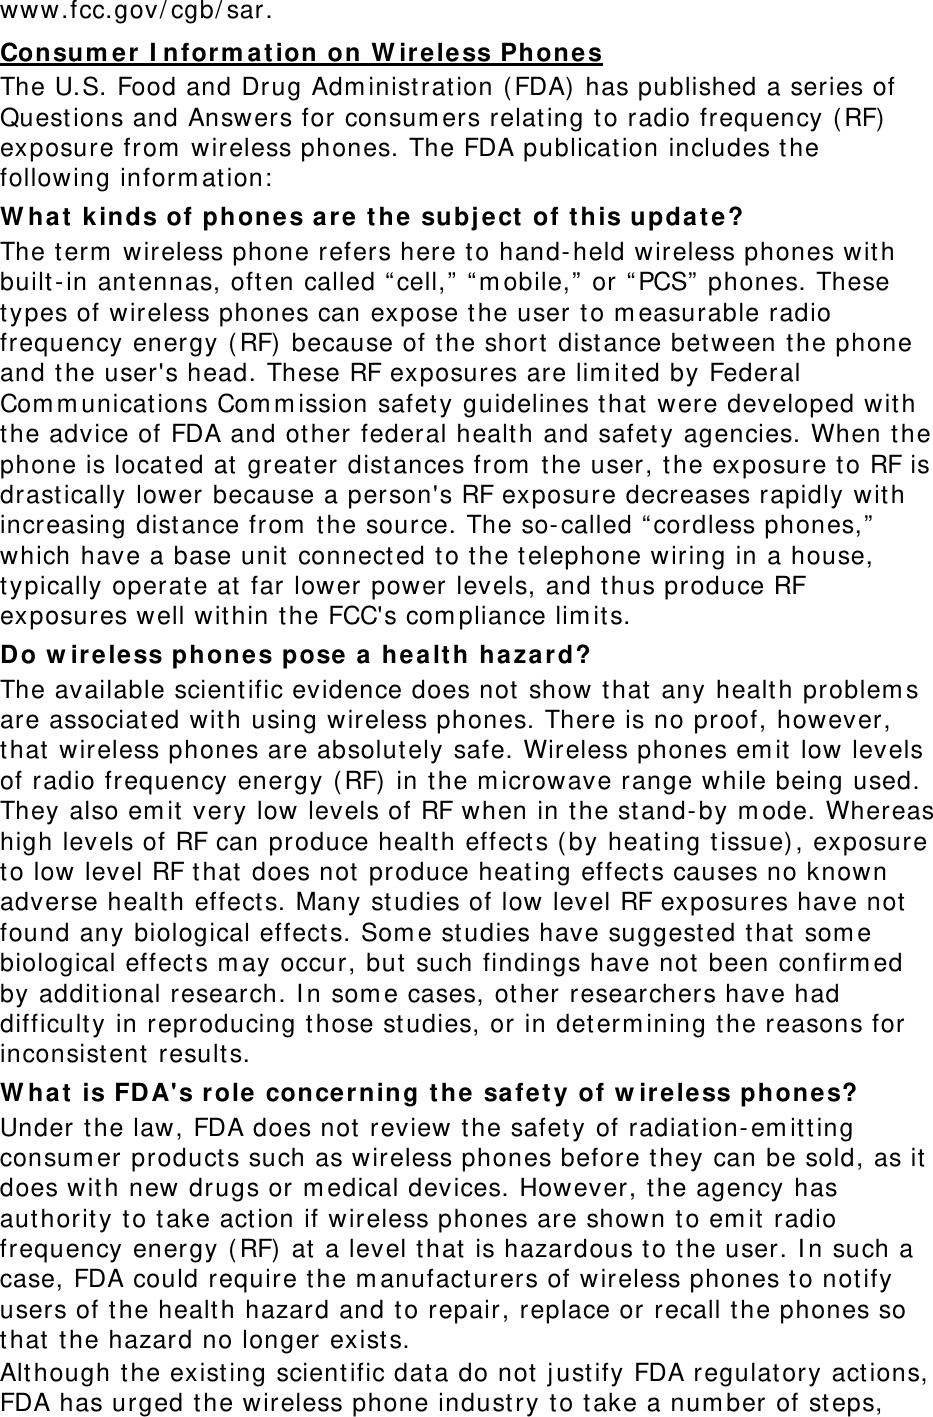 www.fcc.gov/ cgb/ sar. Consum e r  I nfor m at ion on W ir e le ss Phones The U.S. Food and Drug Adm inist ration (FDA) has published a series of Quest ions and Answers for consumers relating to radio frequency ( RF)  exposure from  wireless phones. The FDA publication includes t he following inform ation:  W hat k inds of phones a re the subj e ct of this updat e? The term  wireless phone refers here t o hand-held wireless phones with built-in antennas, often called “ cell,”  “ m obile,” or “ PCS”  phones. These types of wireless phones can expose t he user t o m easurable radio frequency energy ( RF) because of the short dist ance between the phone and the user&apos;s head. These RF exposures are lim ited by Federal Com m unicat ions Com m ission safet y guidelines t hat were developed with the advice of FDA and other federal healt h and safet y agencies. When t he phone is located at greater distances from  t he user, the exposure to RF is drastically lower because a person&apos;s RF exposure decreases rapidly wit h increasing dist ance from  t he source. The so-called “ cordless phones,” which have a base unit  connected to the telephone wiring in a house, typically operate at  far lower power levels, and thus produce RF exposures well wit hin t he FCC&apos;s com pliance lim its. Do w ireless phones pose a healt h haza rd? The available scient ific evidence does not show that any healt h problem s are associat ed wit h using wireless phones. There is no proof, however, that wireless phones are absolutely safe. Wireless phones em it low levels of radio frequency energy (RF)  in t he m icrowave range while being used. They also em it  very low levels of RF when in the st and- by m ode. Whereas high levels of RF can produce health effect s (by heating t issue) , exposure to low level RF that does not  produce heating effects causes no known adverse healt h effect s. Many st udies of low level RF exposures have not  found any biological effects. Som e st udies have suggest ed t hat som e biological effect s m ay occur, but  such findings have not been confirm ed by additional research. I n som e cases, other researchers have had difficult y in reproducing those st udies, or in det erm ining t he reasons for inconsist ent result s. W hat is FDA&apos;s r ole concerning the safety of w ireless phones? Under the law, FDA does not  review t he safety of radiat ion- em itting consum er product s such as wireless phones before they can be sold, as it  does with new drugs or m edical devices. However, t he agency has authorit y t o t ake action if wireless phones are shown to em it radio frequency energy ( RF) at a level that is hazardous t o the user. I n such a case, FDA could require t he m anufacturers of wireless phones to notify users of t he health hazard and to repair, replace or recall the phones so that t he hazard no longer exists. Although the existing scient ific data do not j ust ify FDA regulatory actions, FDA has urged t he wireless phone indust ry to take a num ber of st eps, 